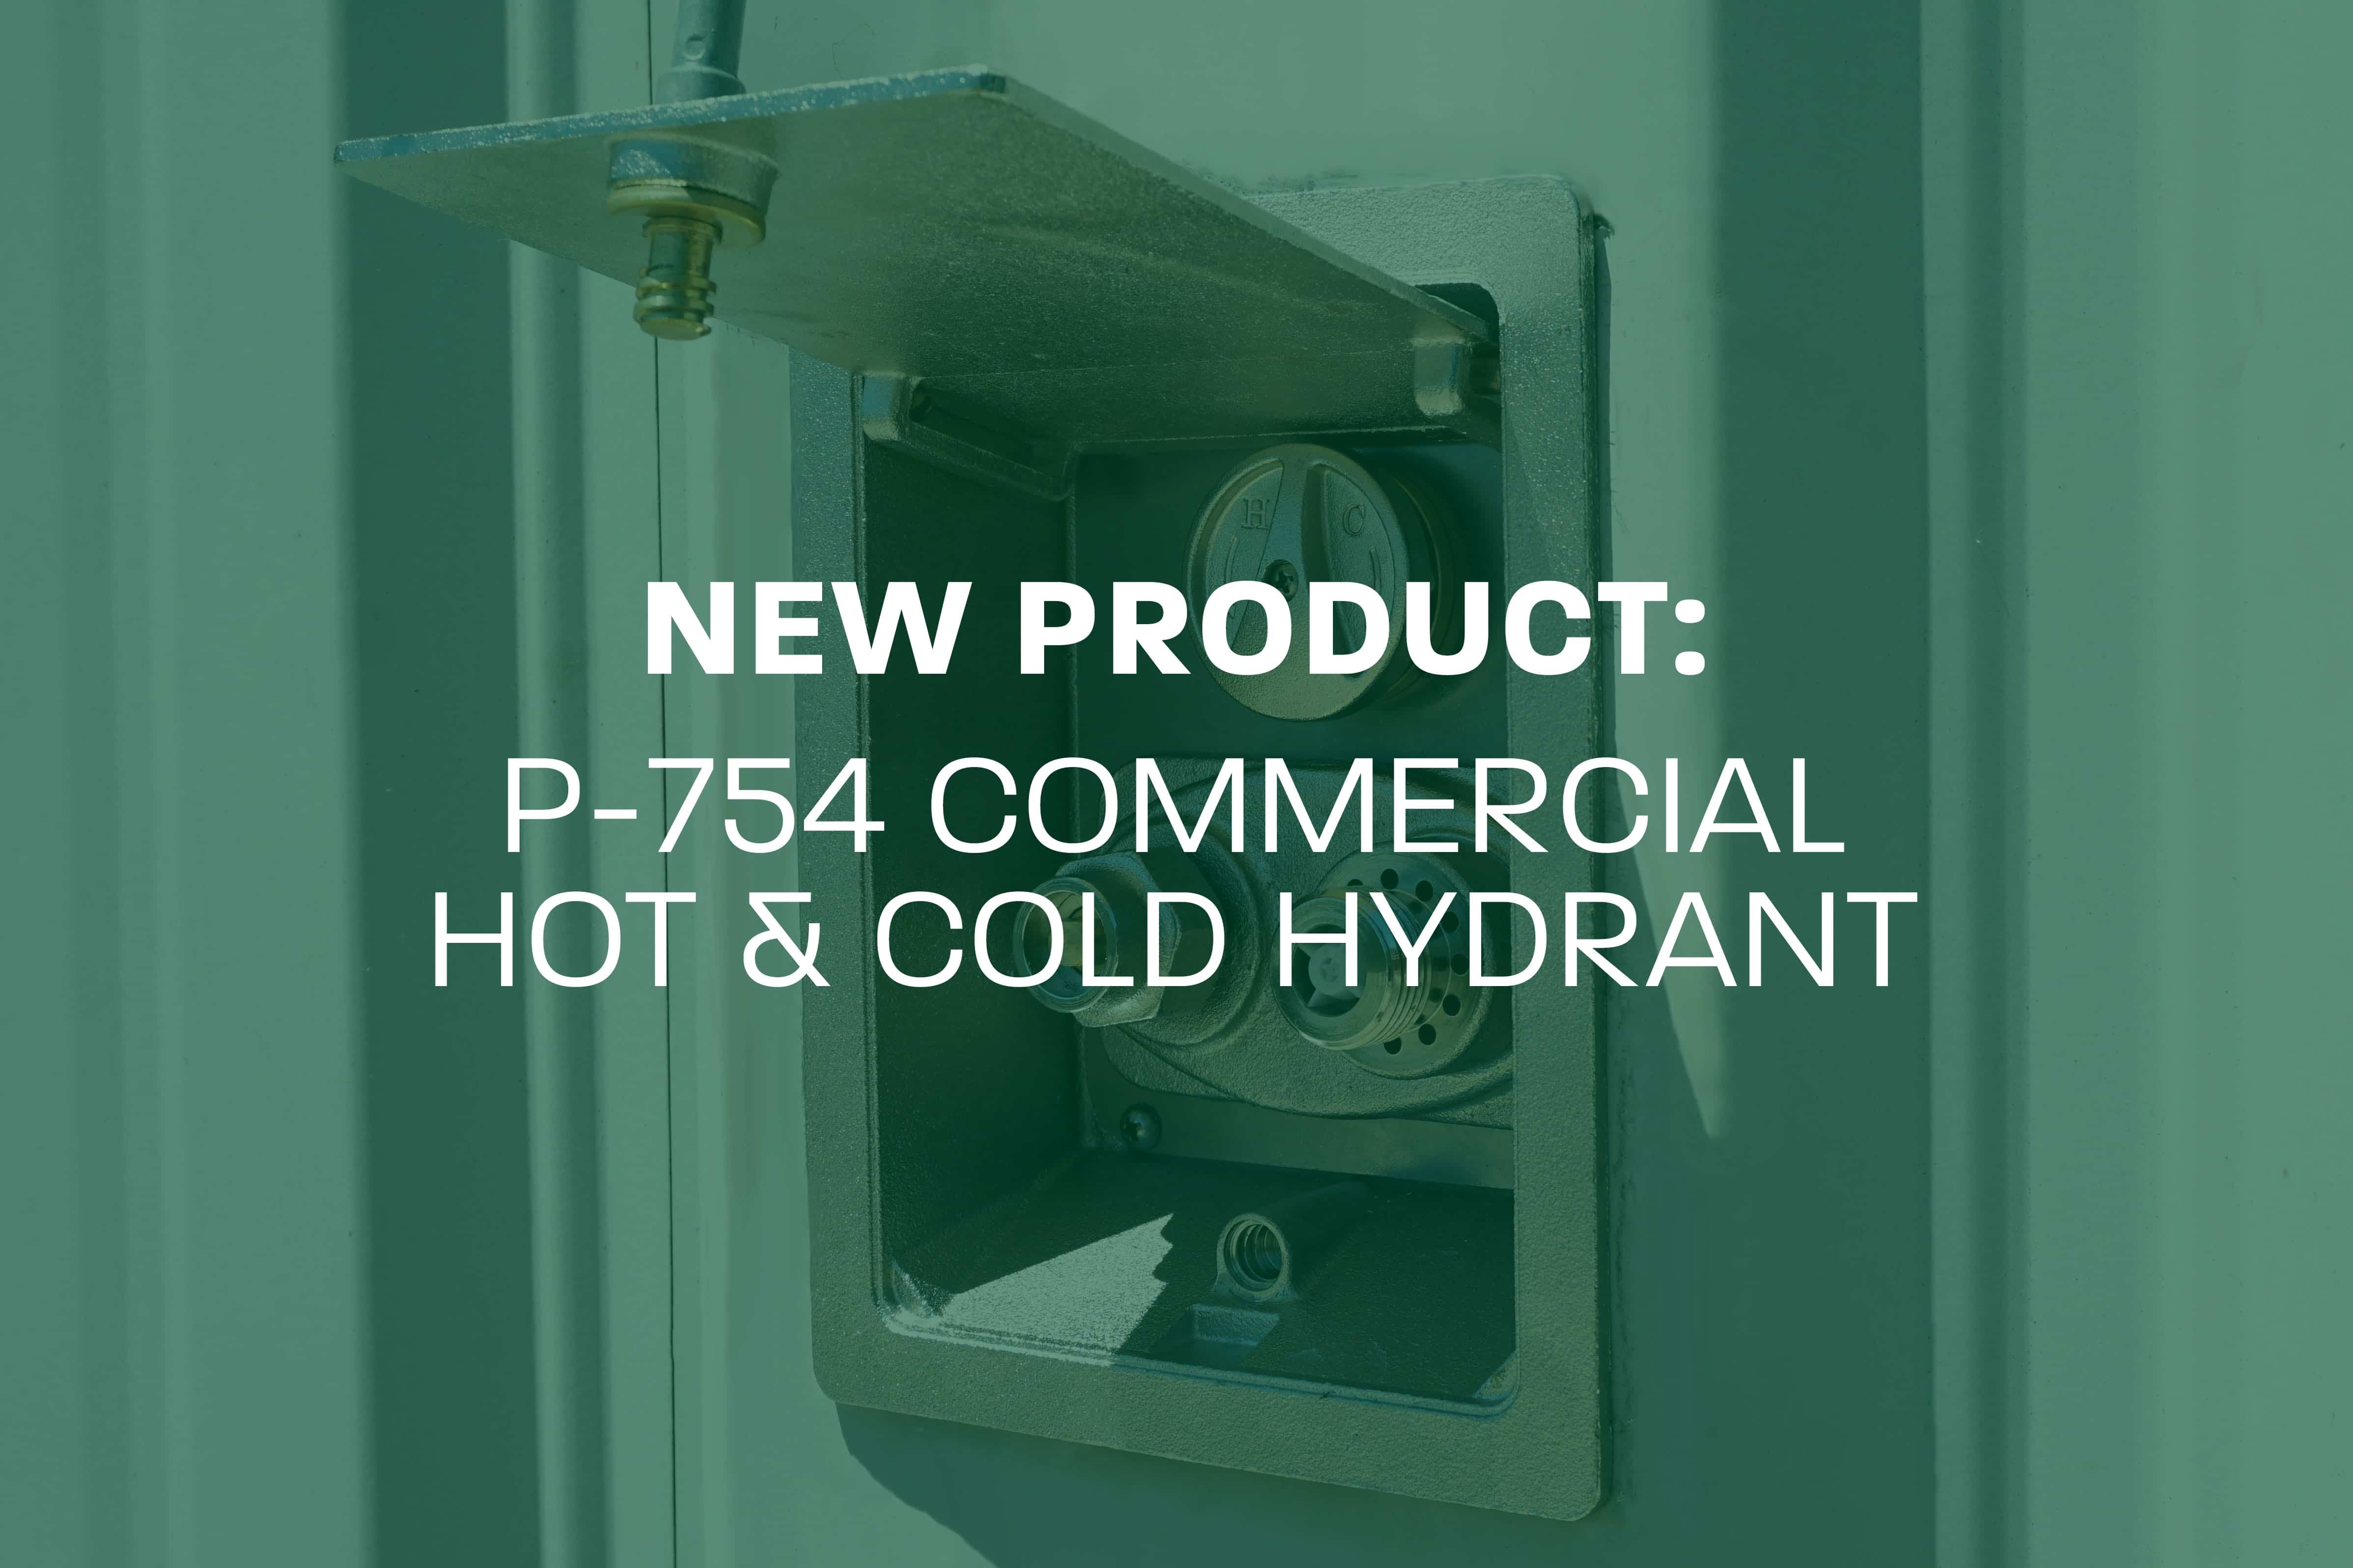 PRIER Introduces New Product: Commercial Hot & Cold Wall Hydrant